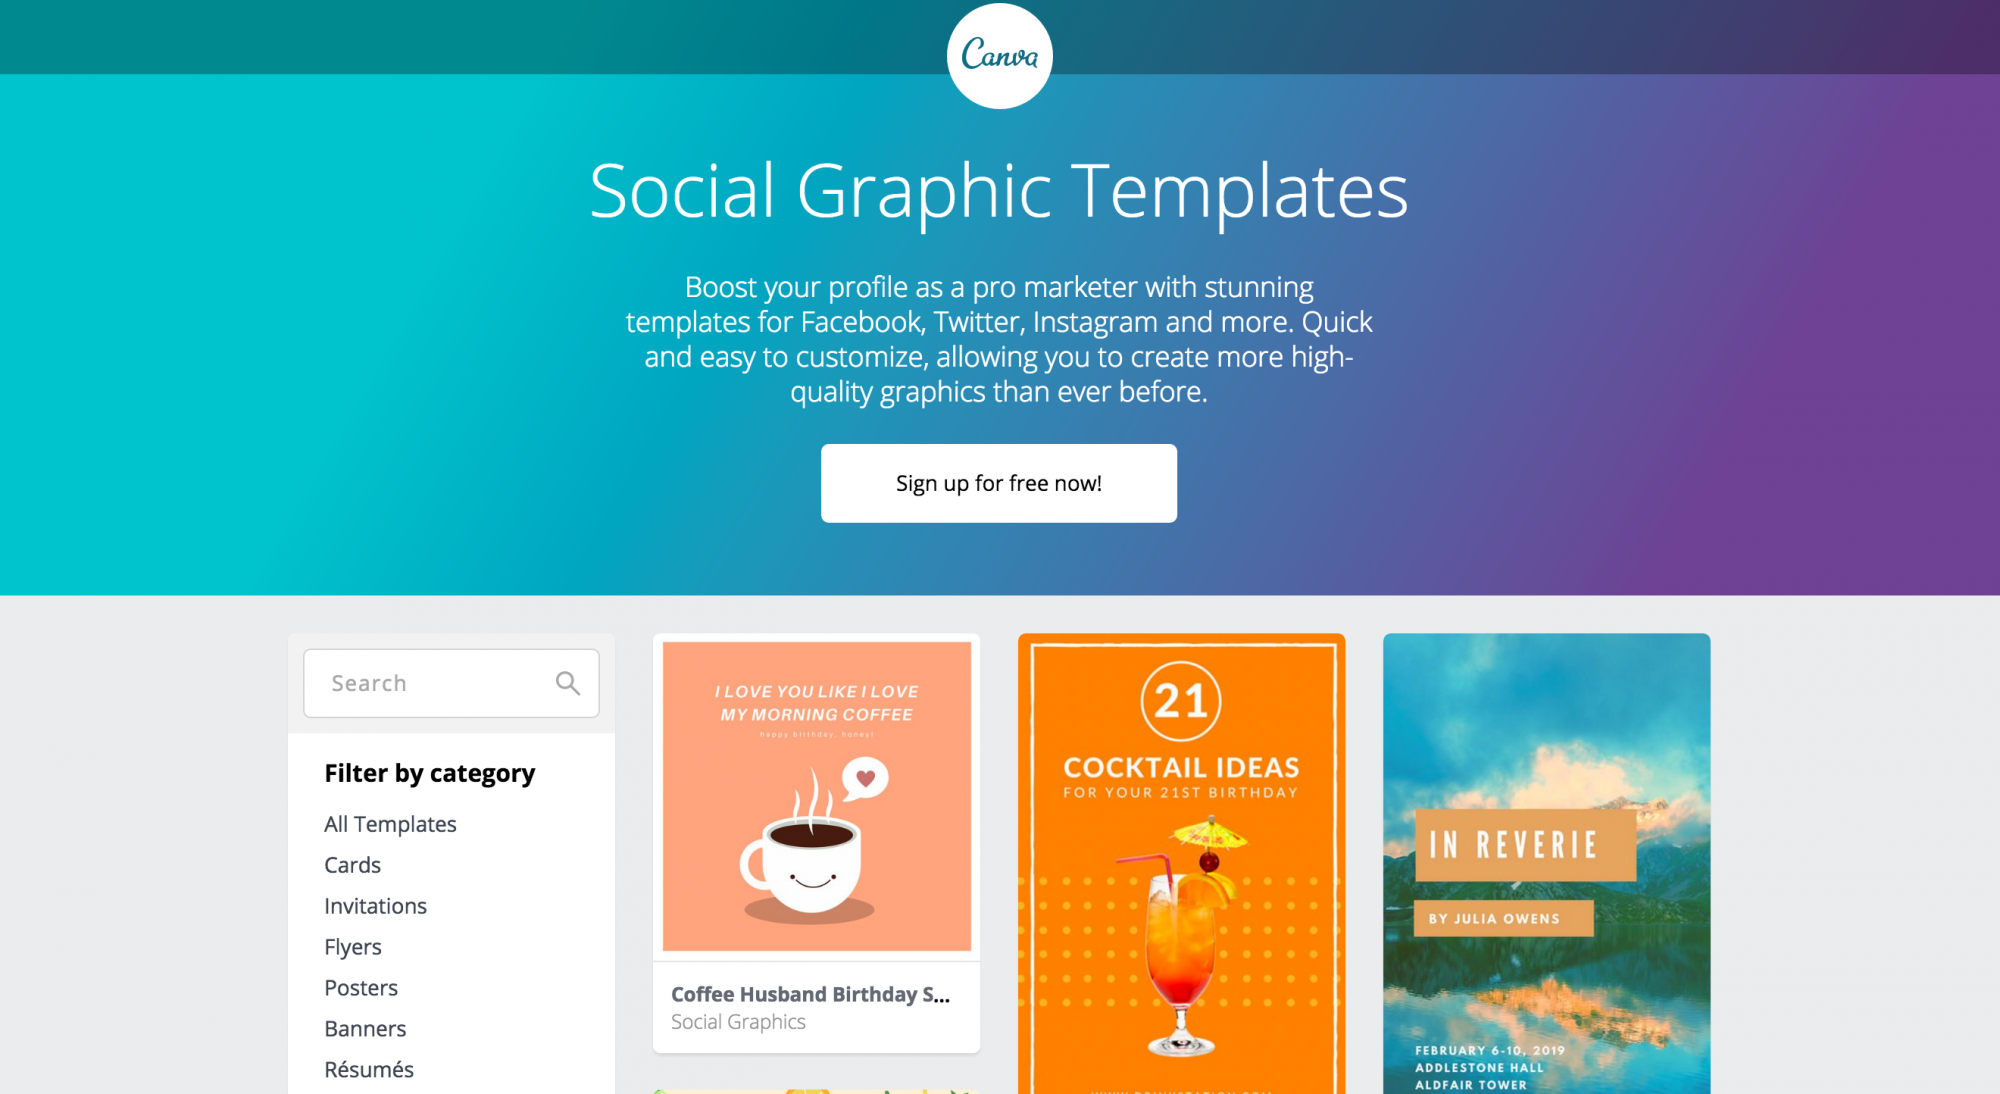 Social Graphic Templates by Canva